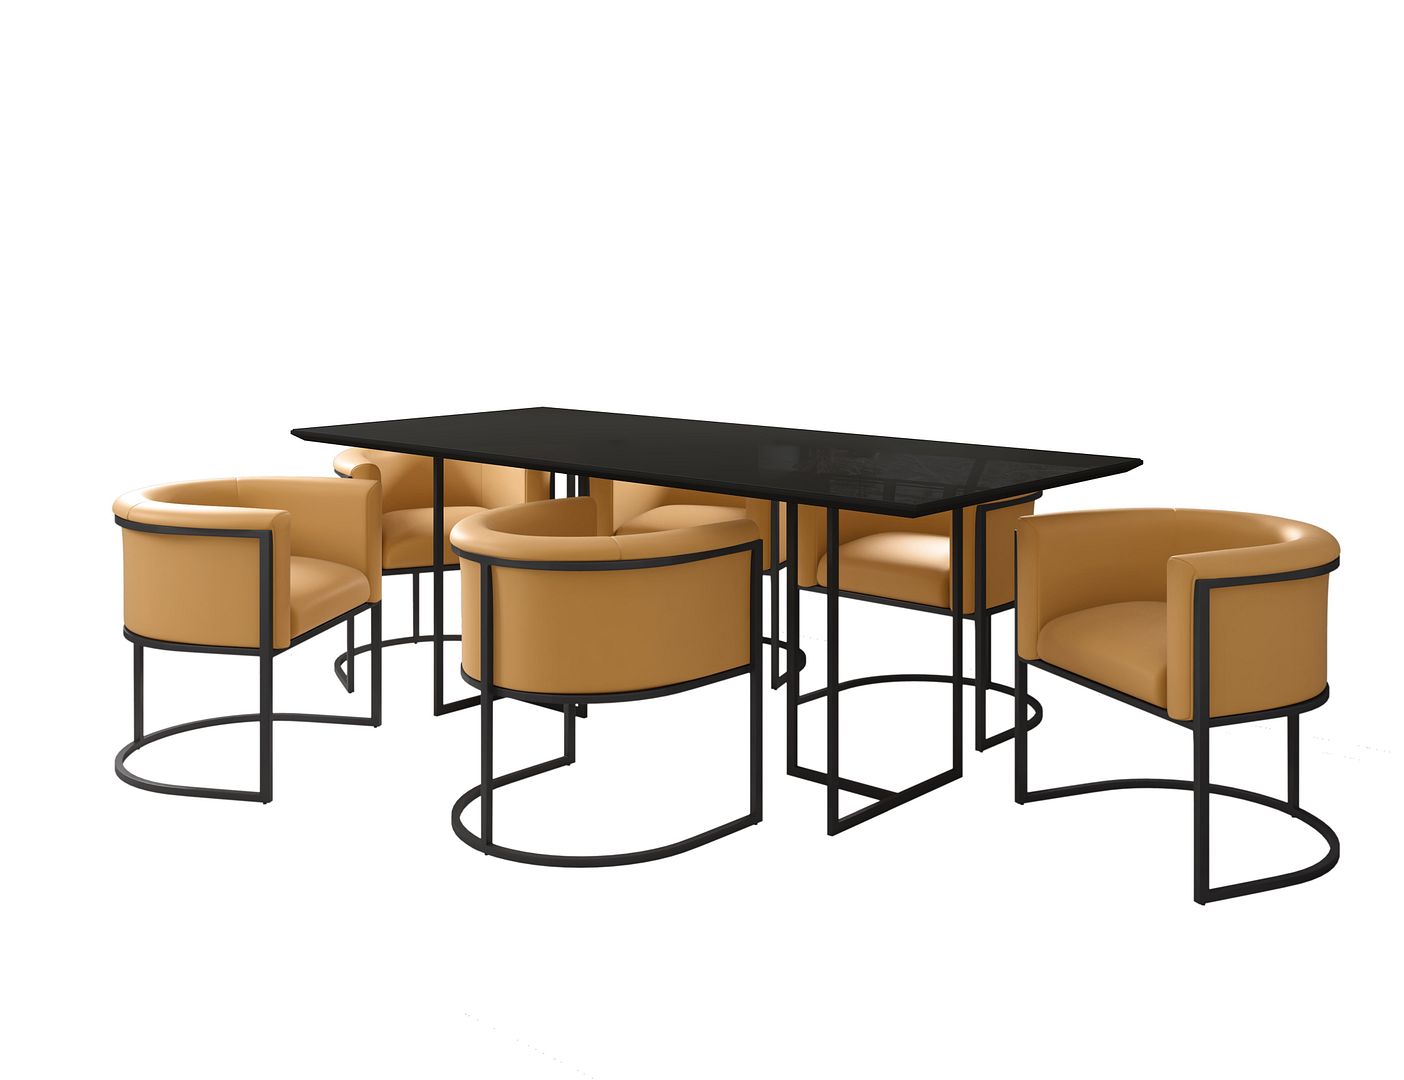 Celine Dining Table with 6 Bali Chairs - East Shore Modern Home Furnishings